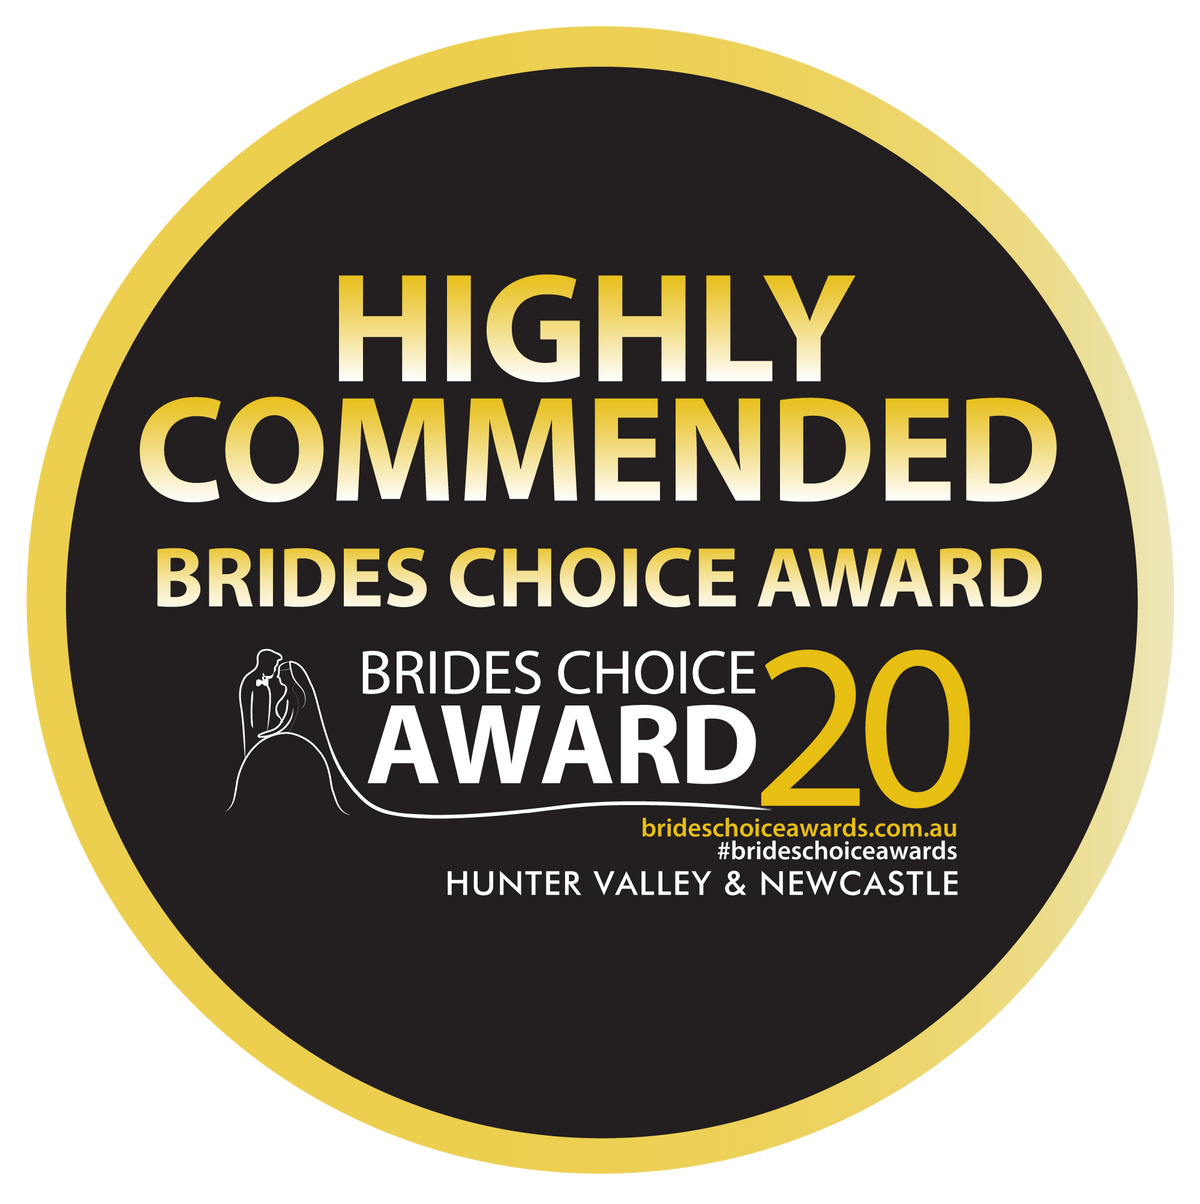 brides choice award highly reocommended 2020